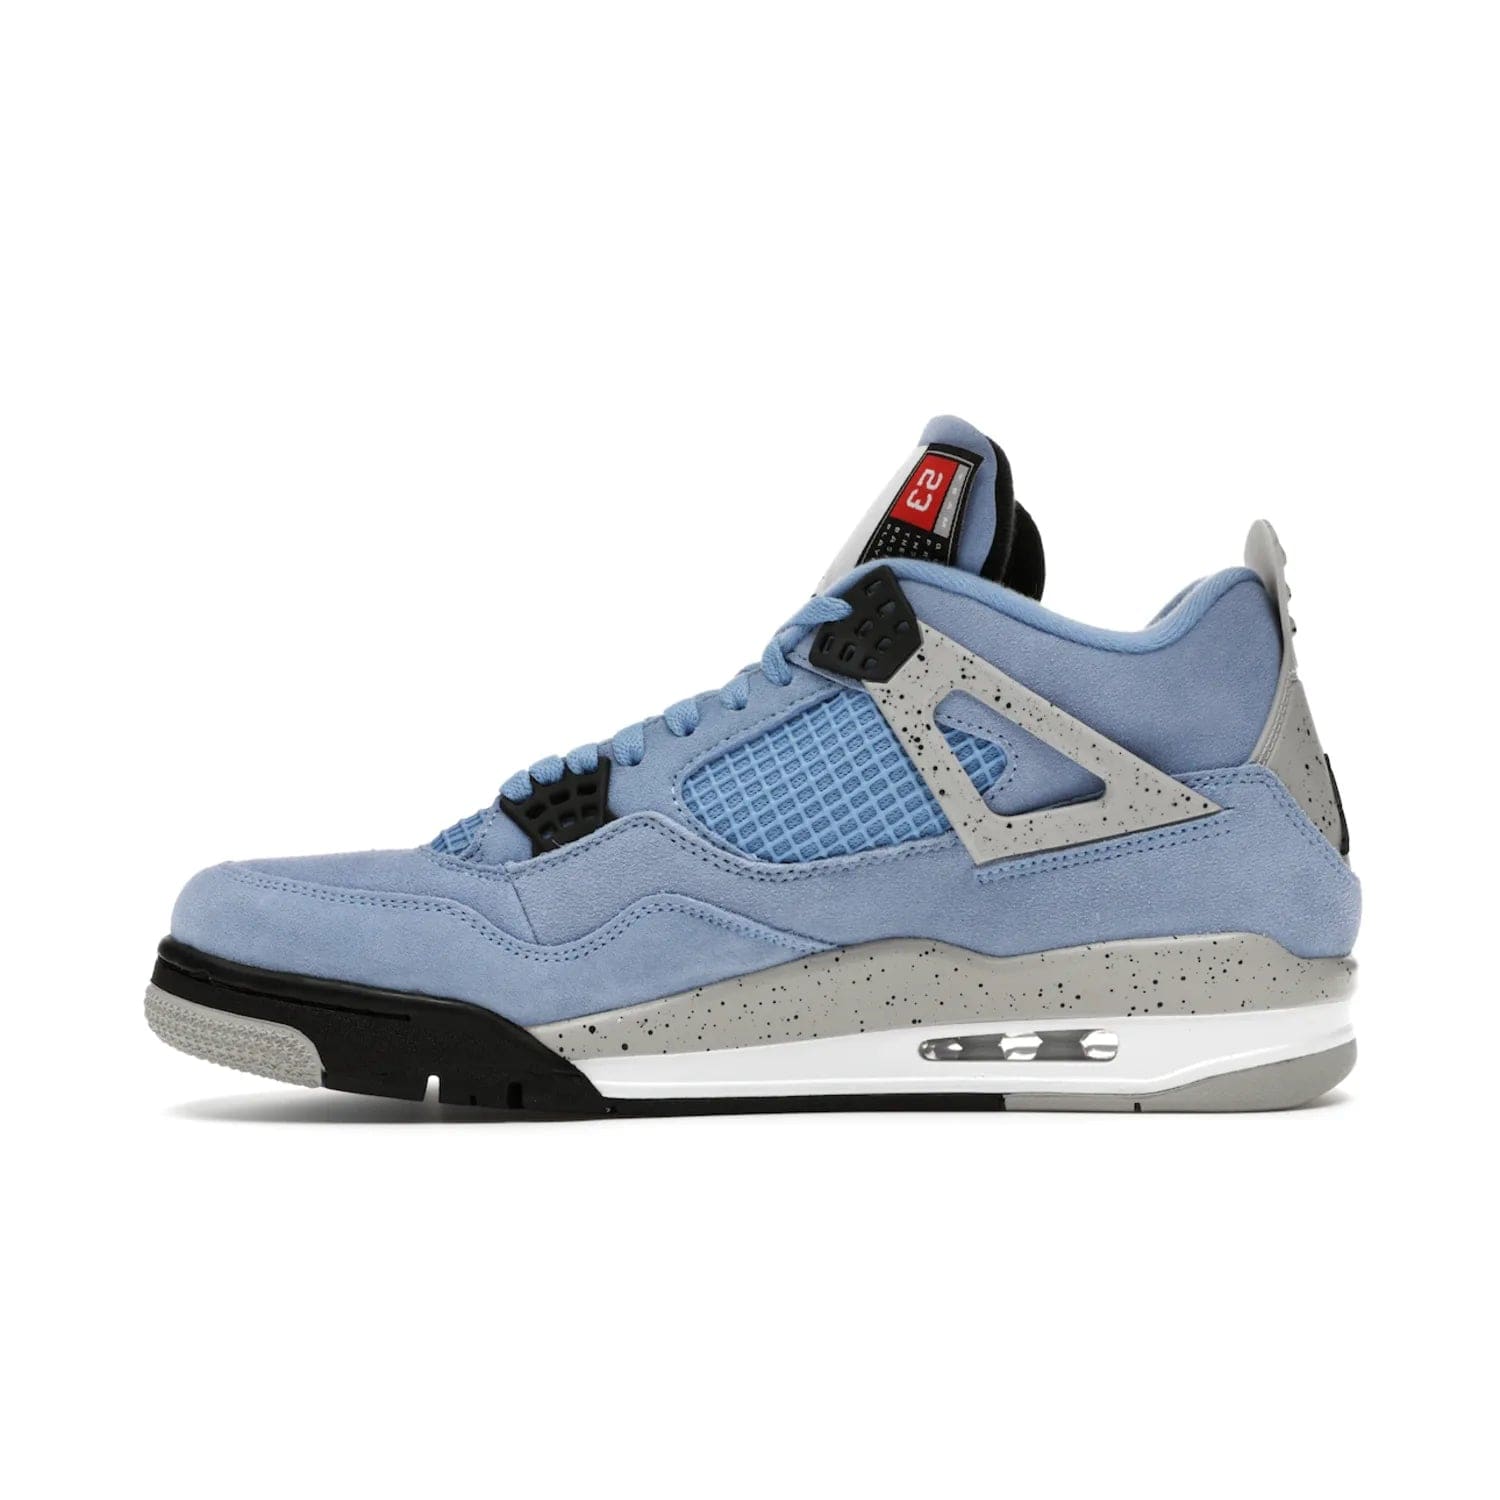 Jordan 4 Retro University Blue - Image 19 - Only at www.BallersClubKickz.com - The Air Jordan 4 University Blue honors MJ's alma mater. Rich University Blue suede, panels of netting, and Cement Grey speckled eyelets give this design an edgy look. Features a black, white and Tech Grey sole with a clear Air unit and two woven labels on the tongue. Jumpman logo & Team Jordan jock tag included. Released April 2021.